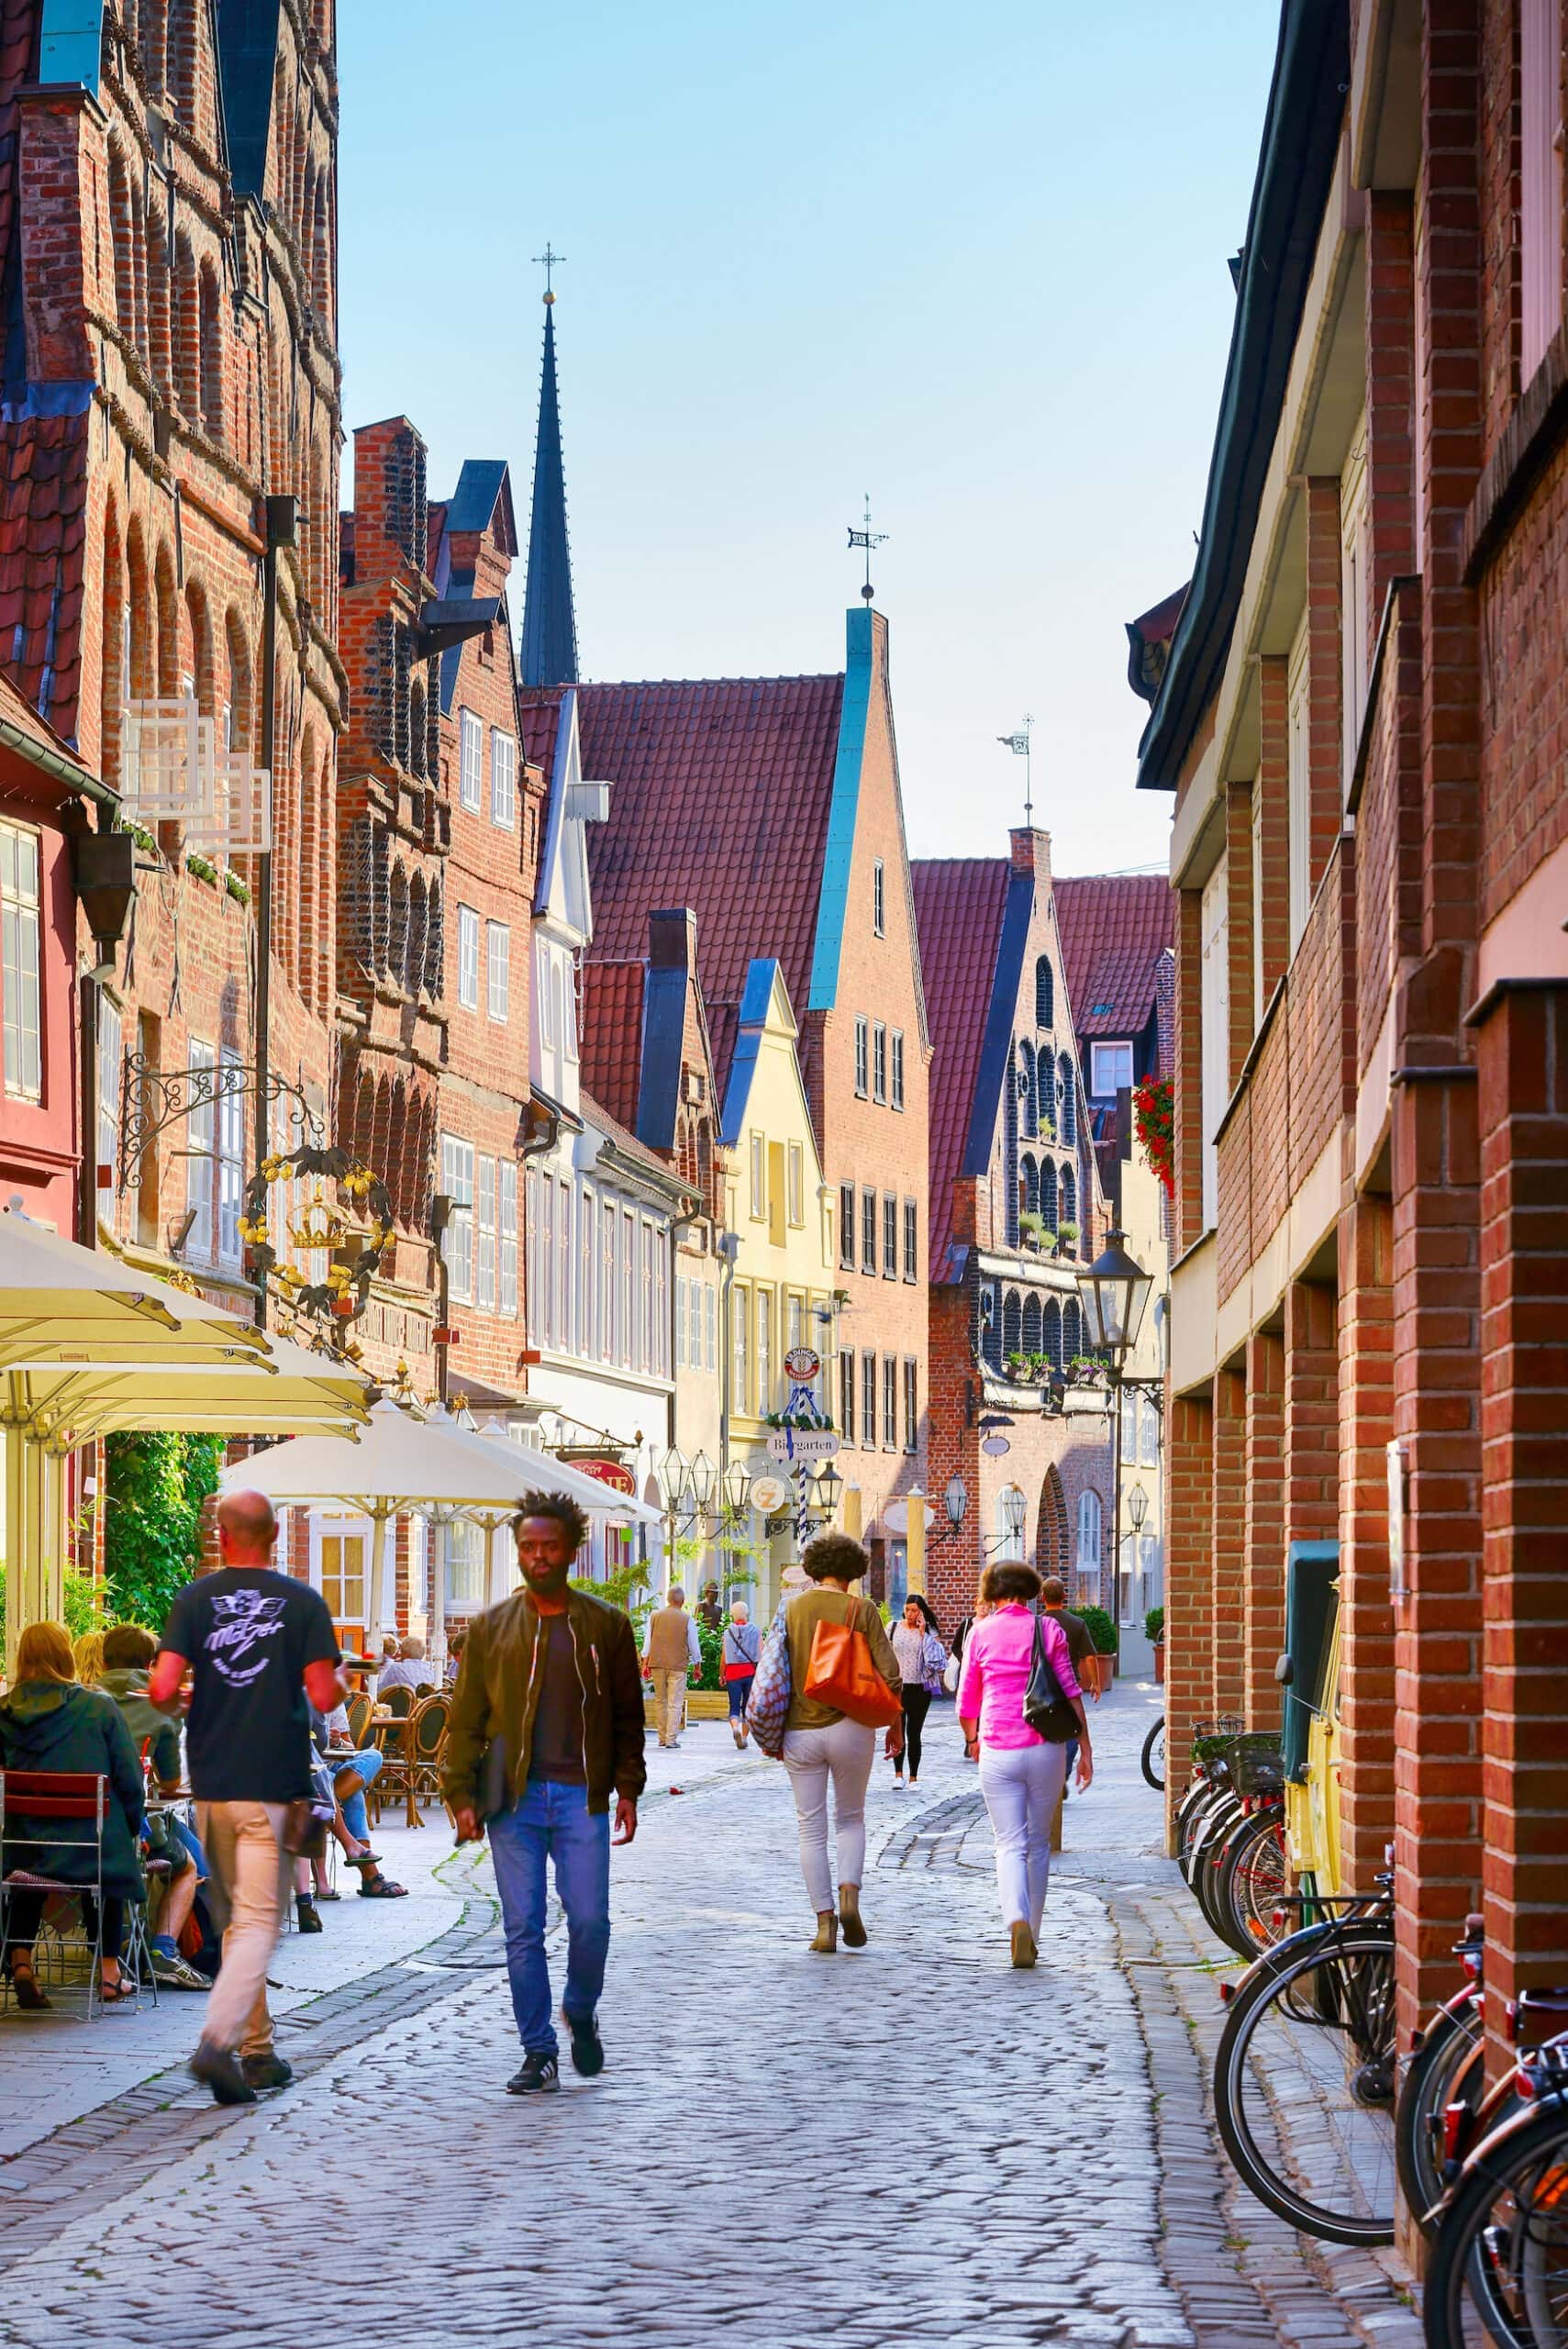 Typical architecture on Heiligengeiststraße in the old town of Lüneburg with tourists.